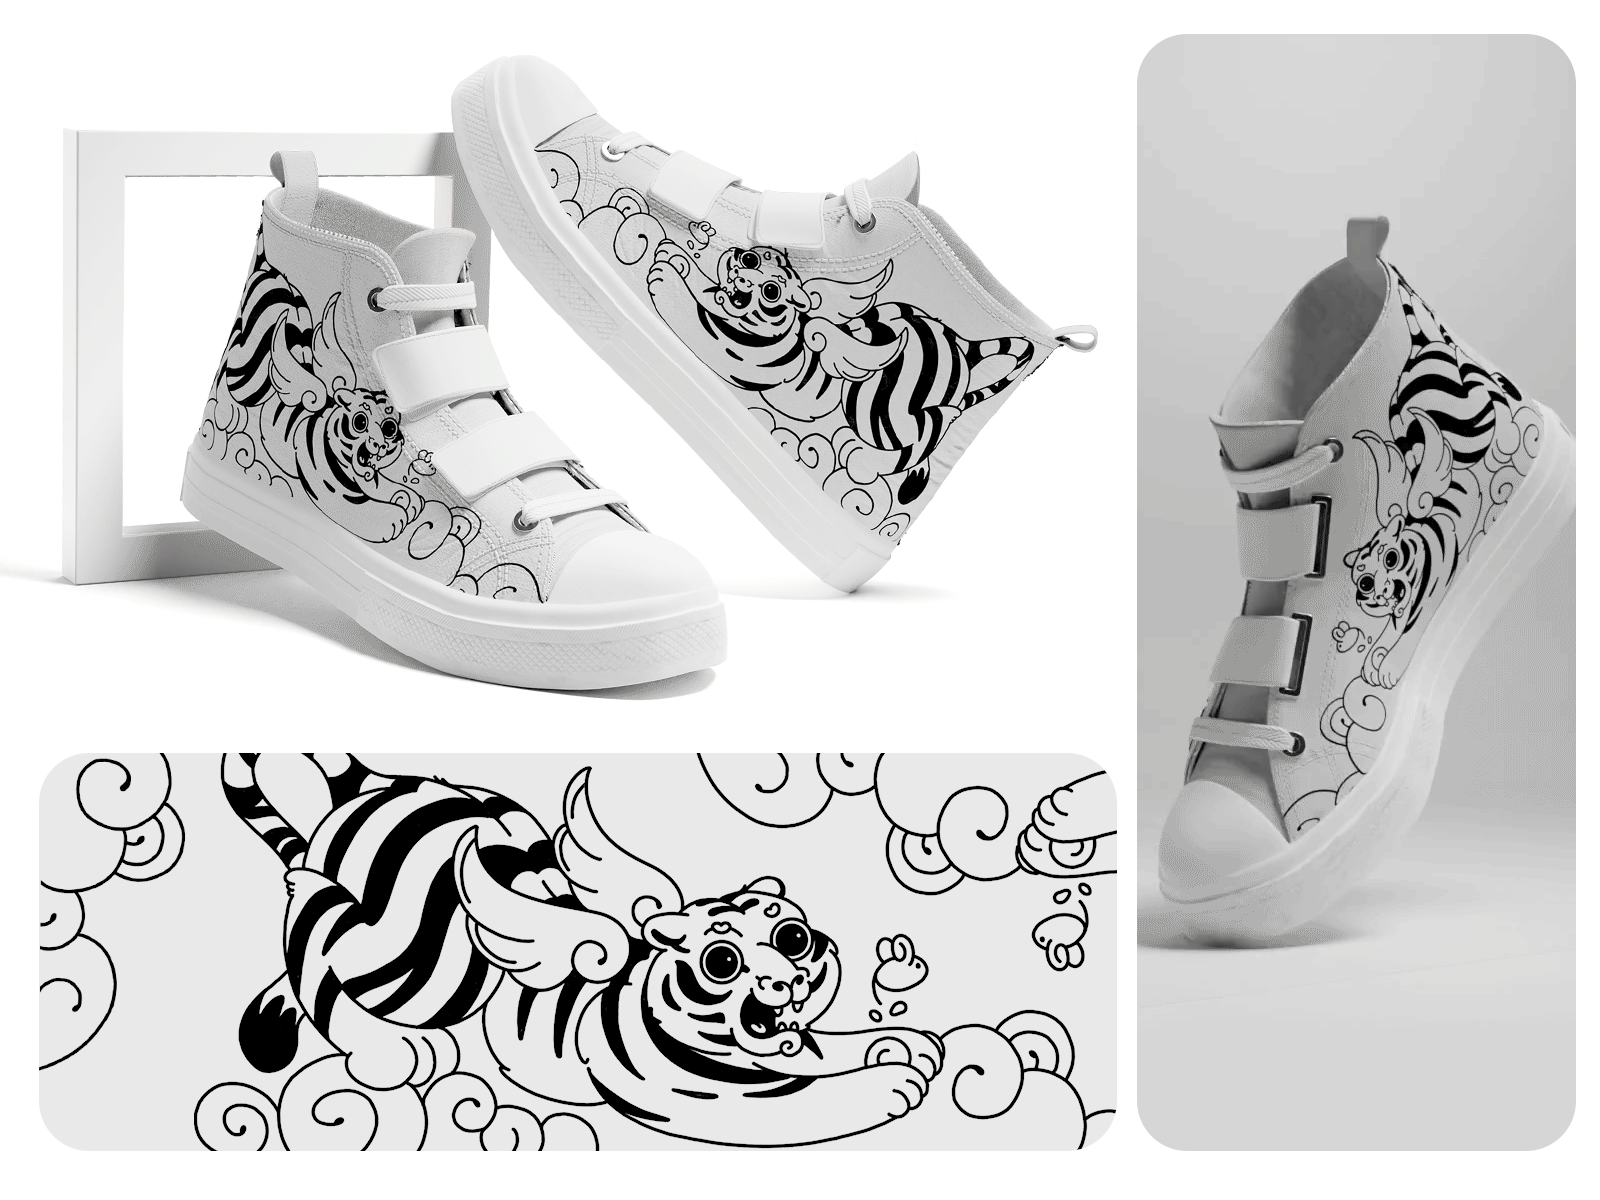 "Fusion of cultures" v1. shoe print 3d animation charactedesign cute art design fashon graphic design illustration motion graphics print shoe sneakers tiger